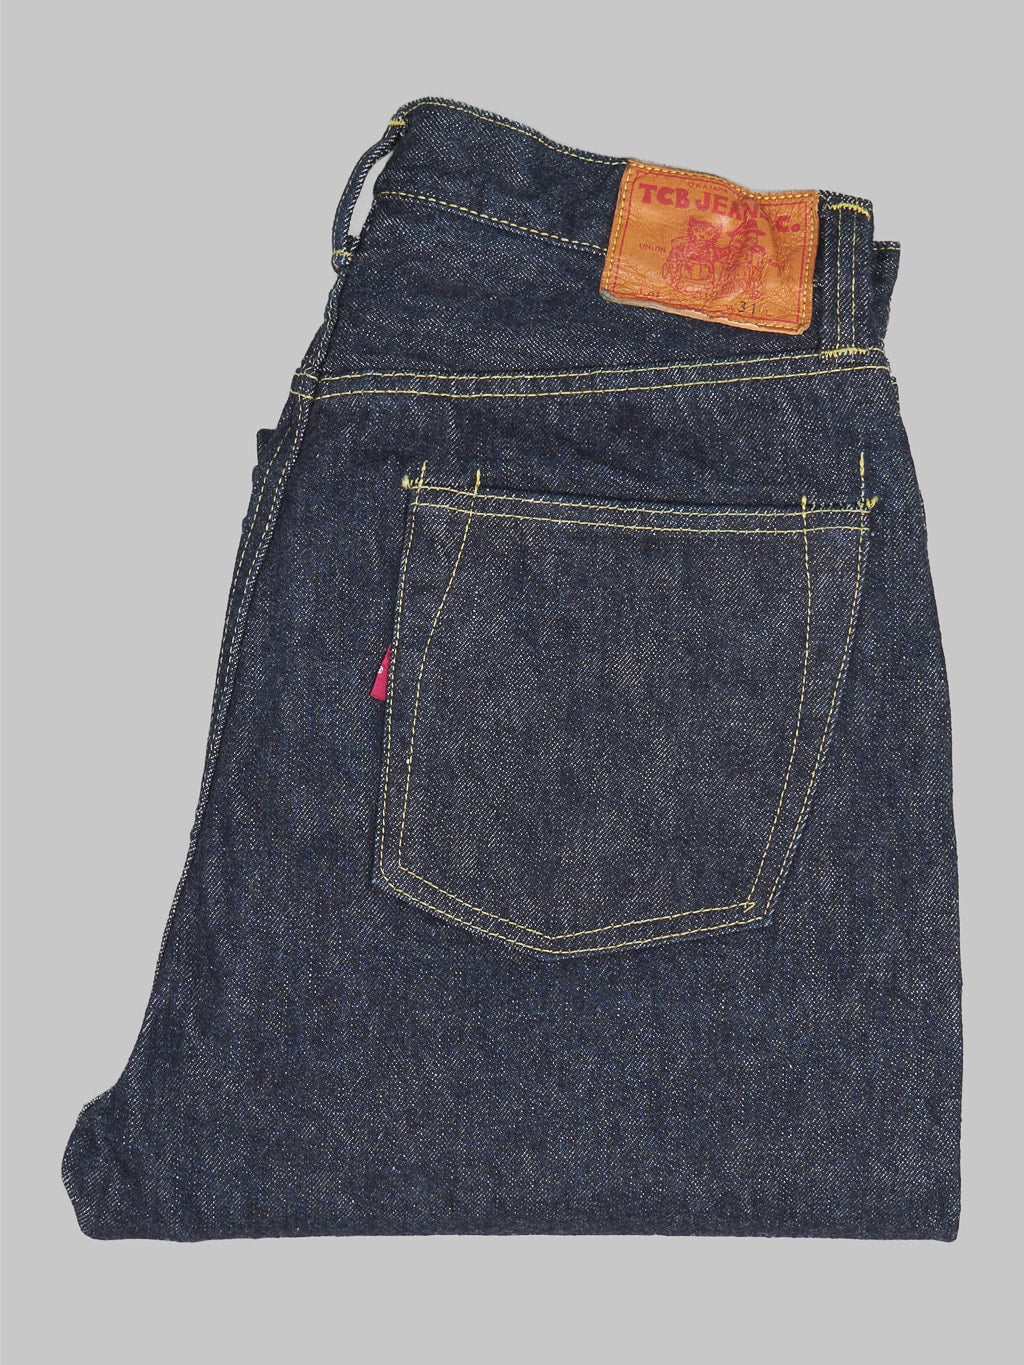 tcb s40s wwii regular straight jeans back